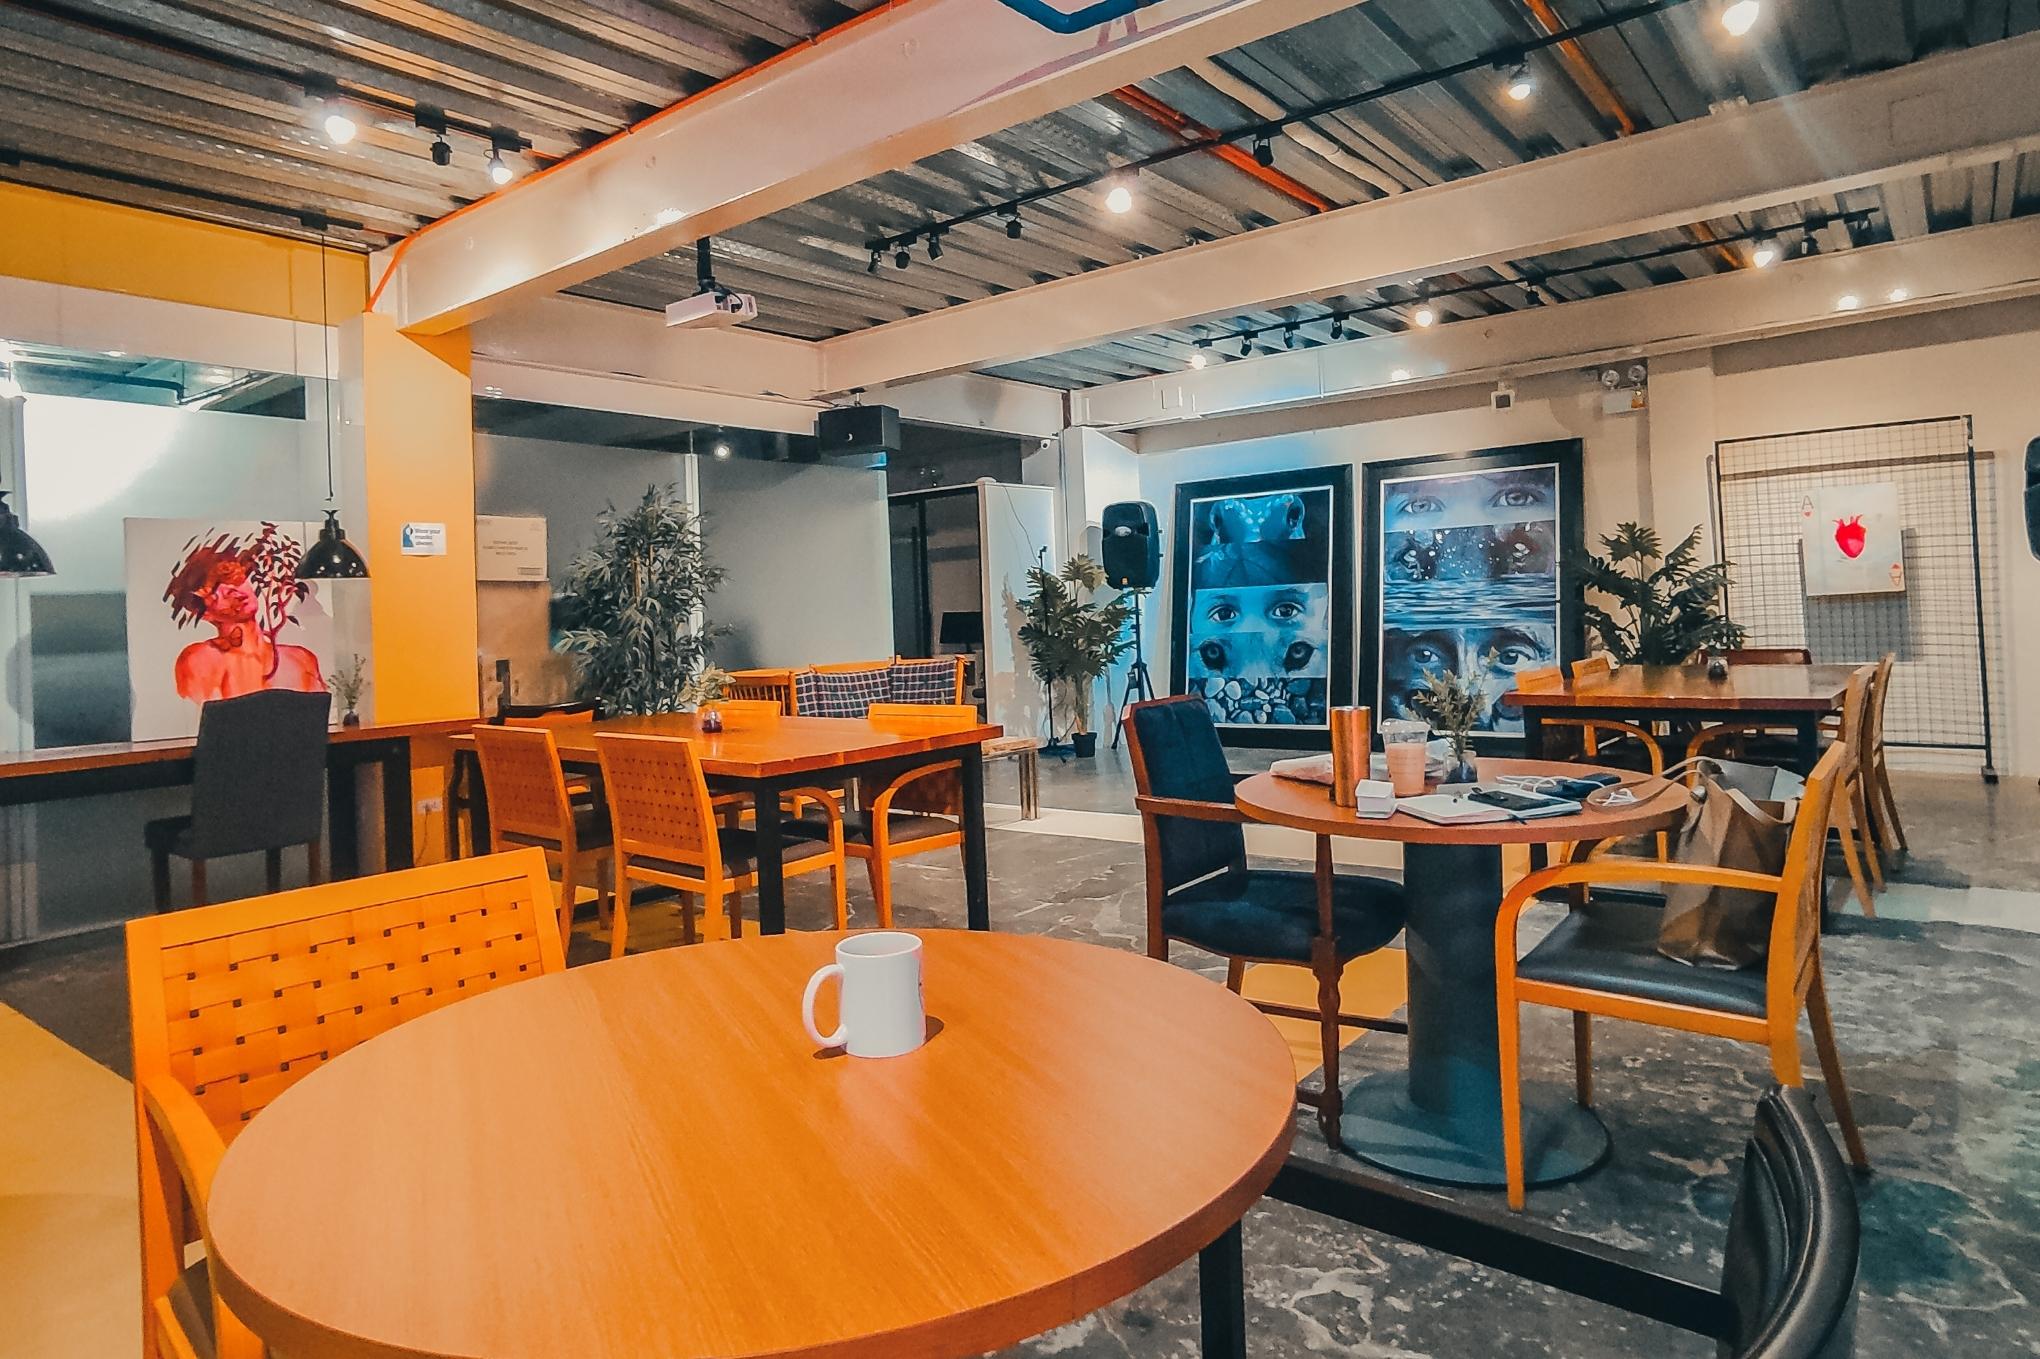 To show how the co-working space at Aajogo Mandaue looks like